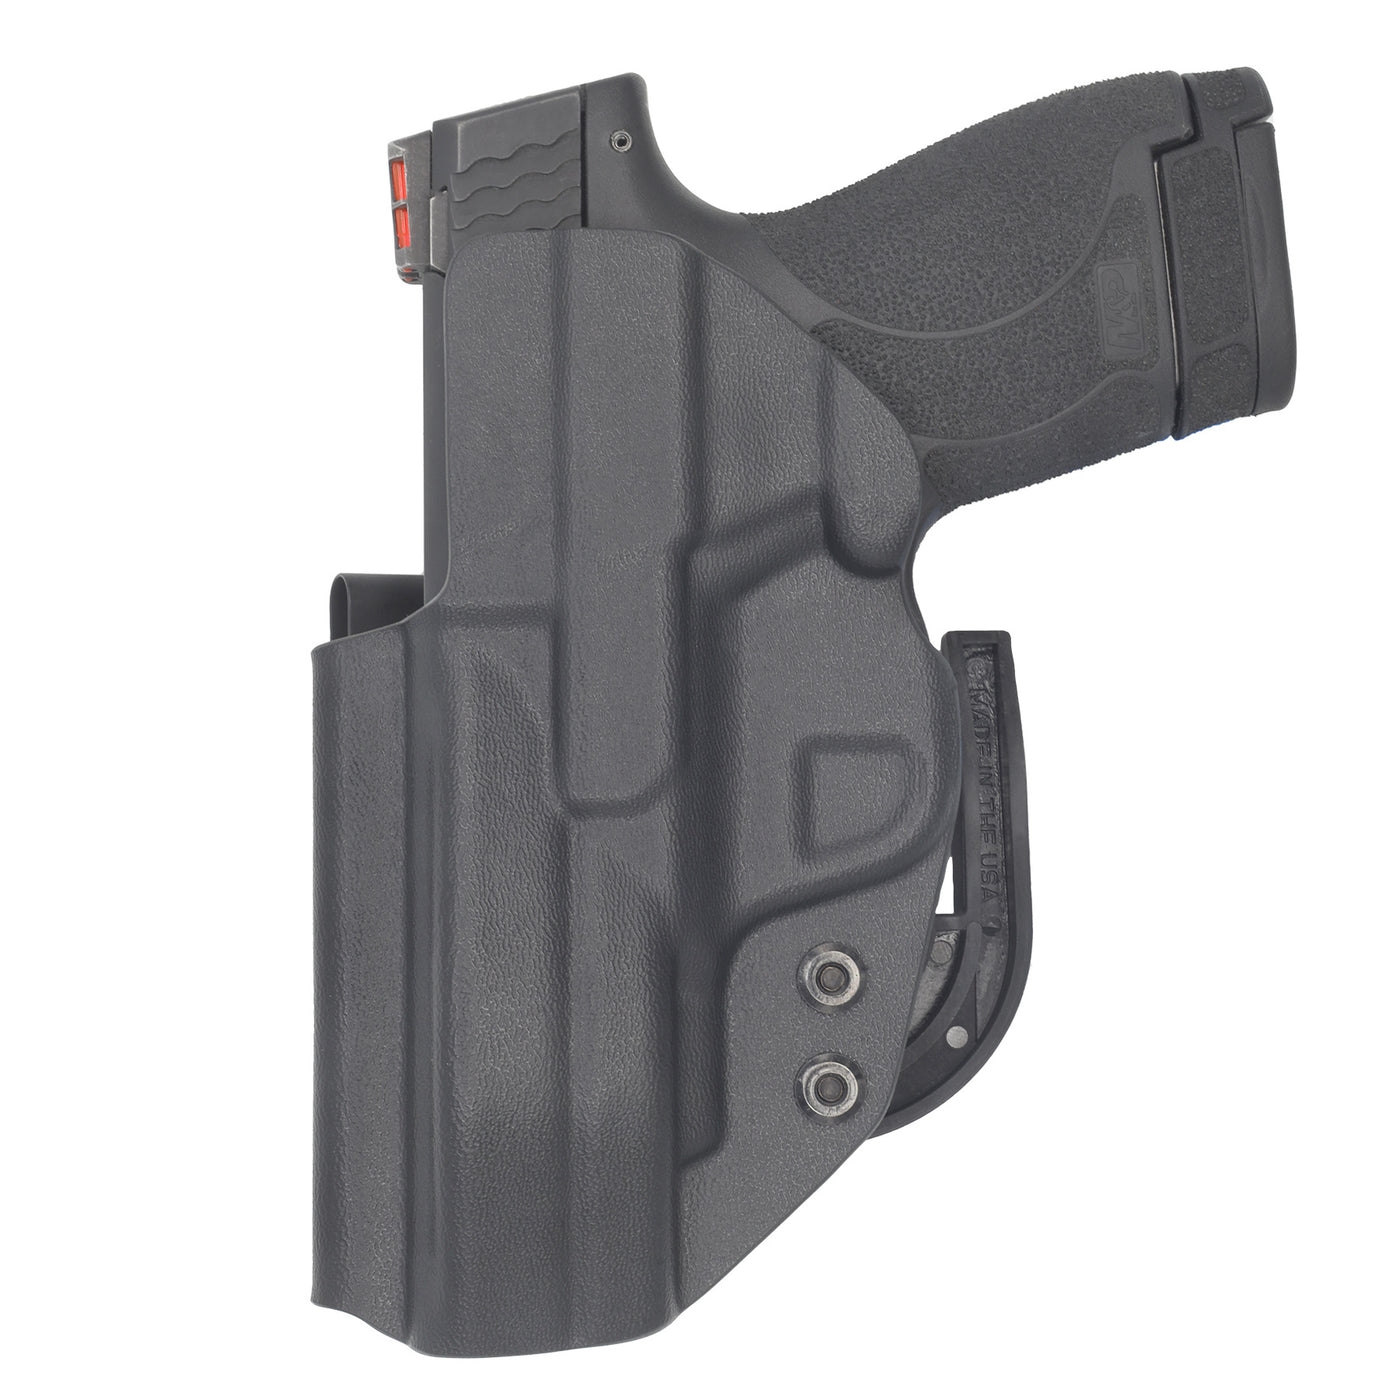 C&G Holsters quick ship Alpha IWB kydex holster for Smith & Wesson M&P Shield 9/40 4" in holstered position rear view